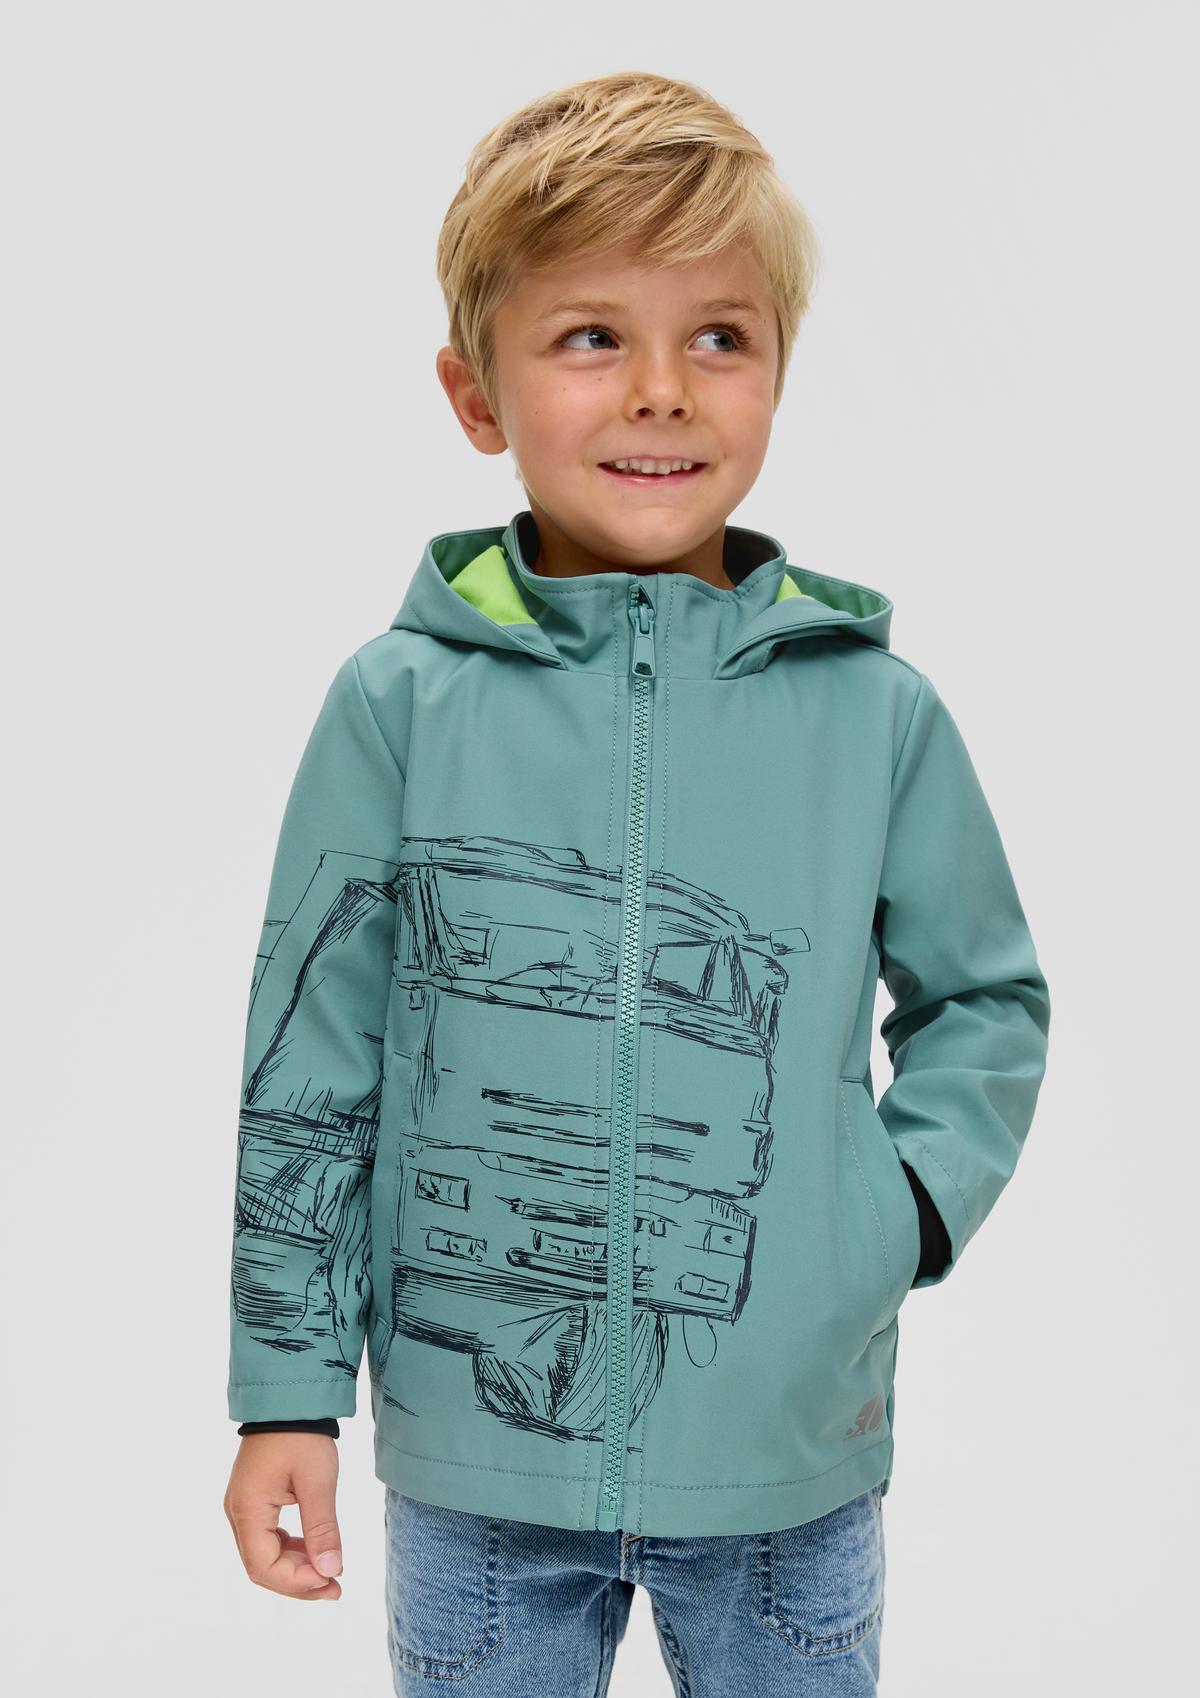 Softshell jacket with a jersey lining